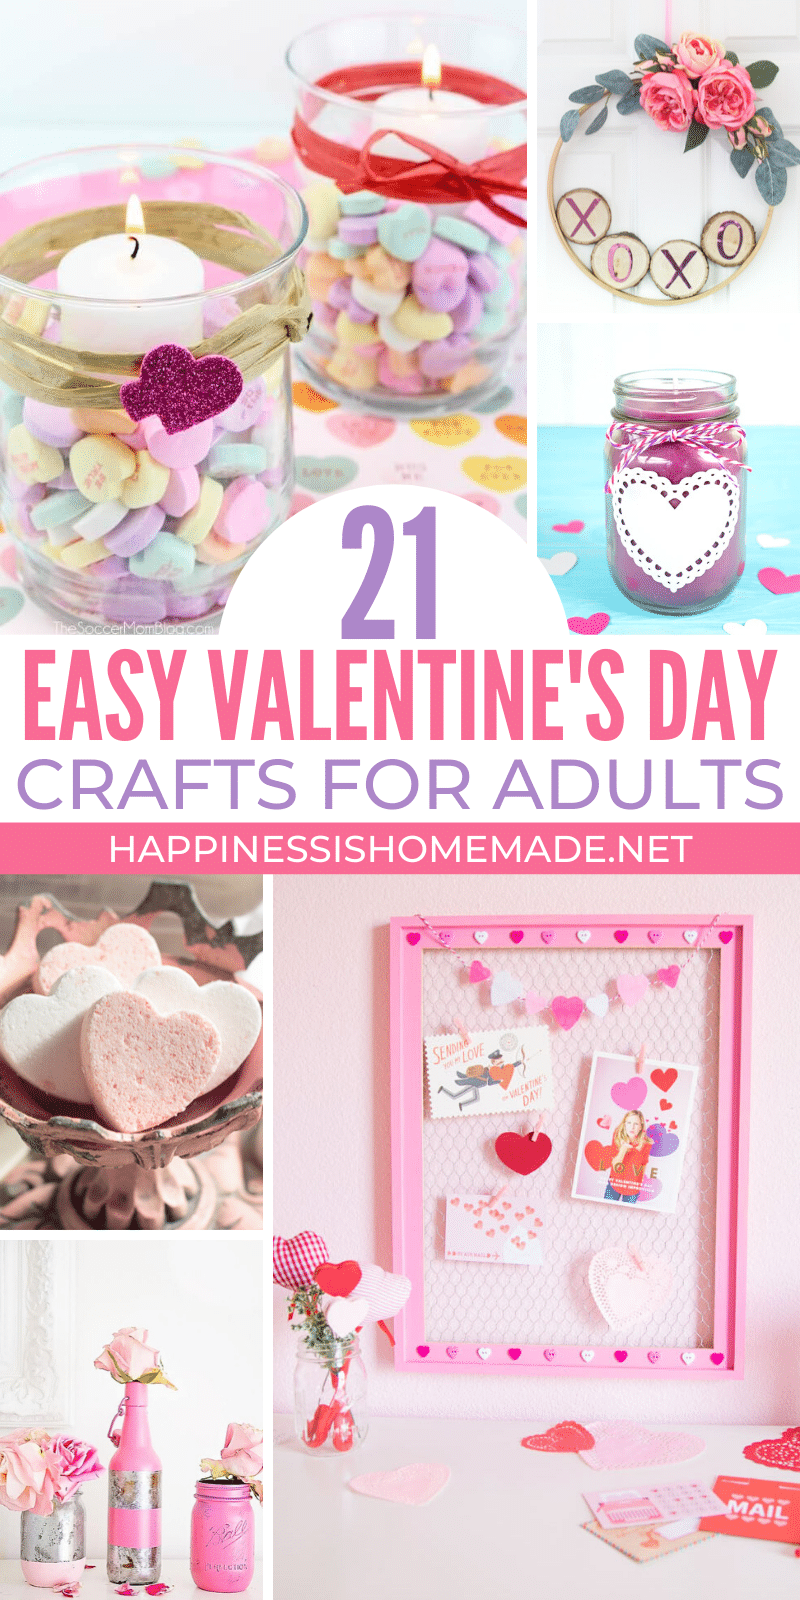 Open-Ended Valentine's Day Crafts - Our Daily Craft